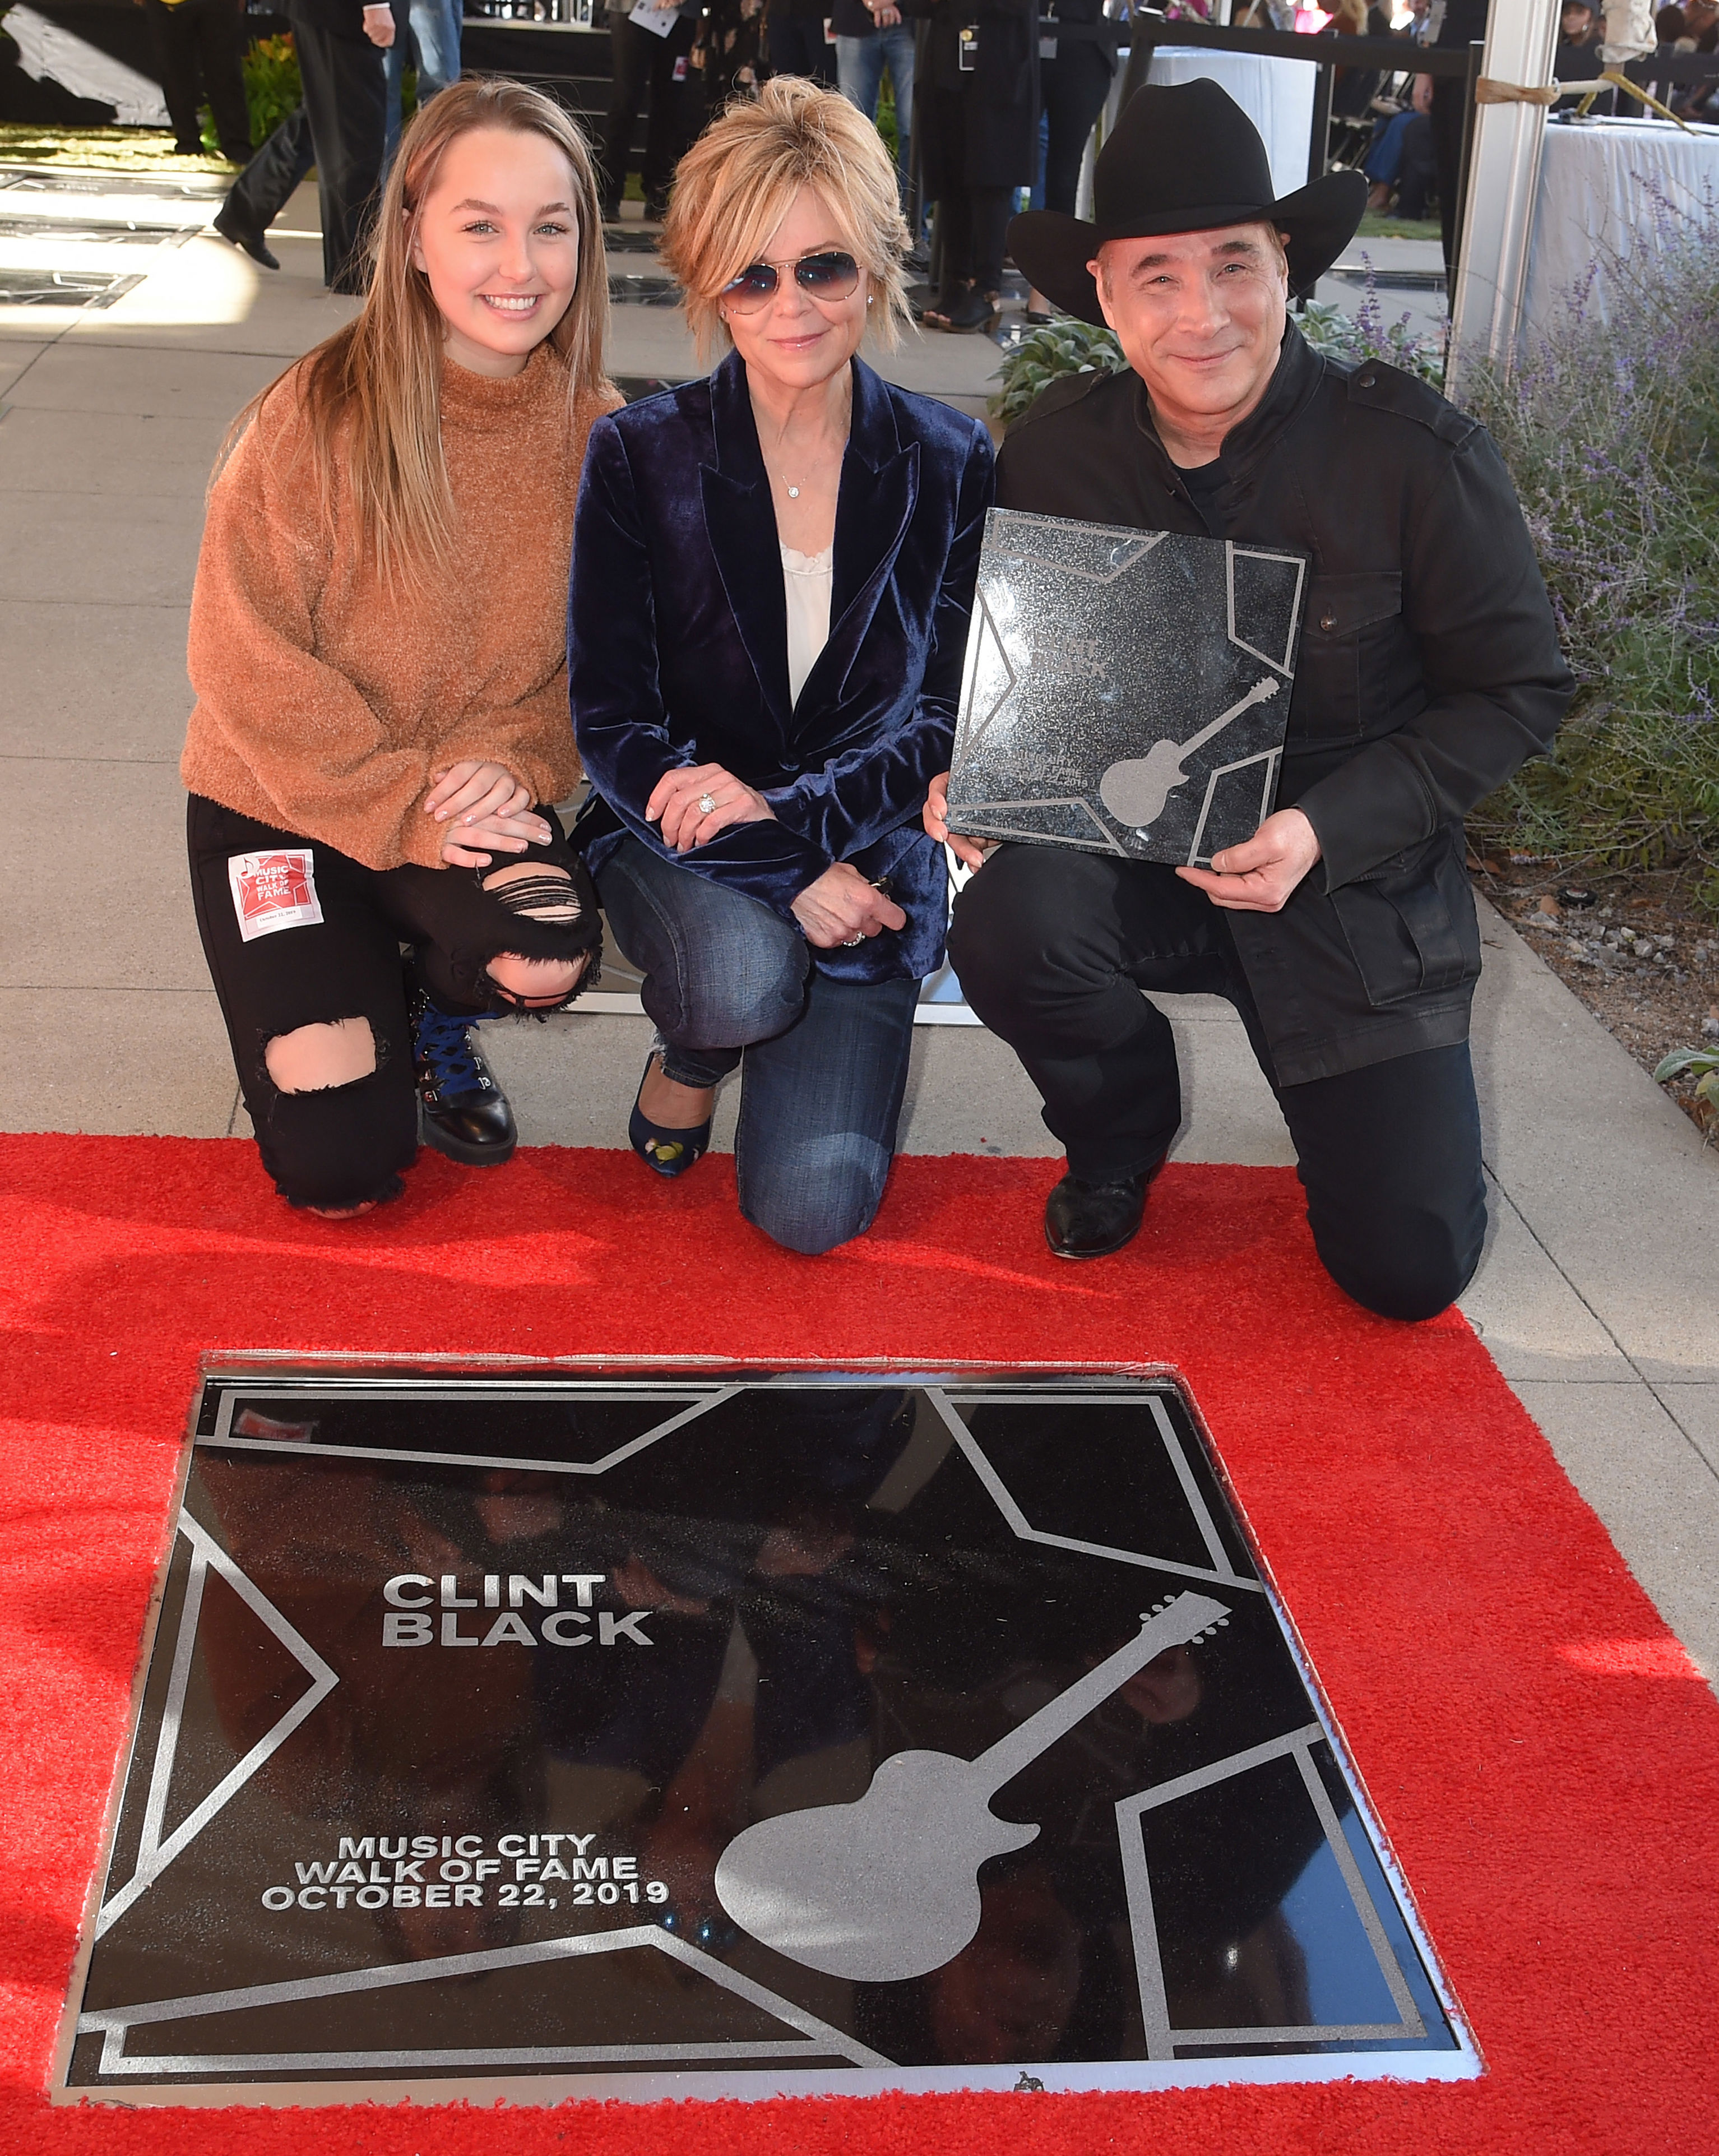 <p>Lily Pearl Black (who was born in 2001) joined mom Lisa Hartman Black and dad Clint Black as he was inducted into the Music City Walk of Fame in Nashville in late 2019. Lily is following in her parents' footsteps: In 2021, dad Clint Black and Lisa, who used to be a pop-rock singer before she shifted to acting, announced their first-ever joint tour, "Mostly Hits & the Mrs." Lily, an aspiring country artist, is joining them while taking a gap year from her music studies at Nashville's Belmont University, <a href="https://people.com/country/clint-black-lisa-hartman-daughter-lily-going-on-tour/">People</a> magazine reported in October 2021.</p>